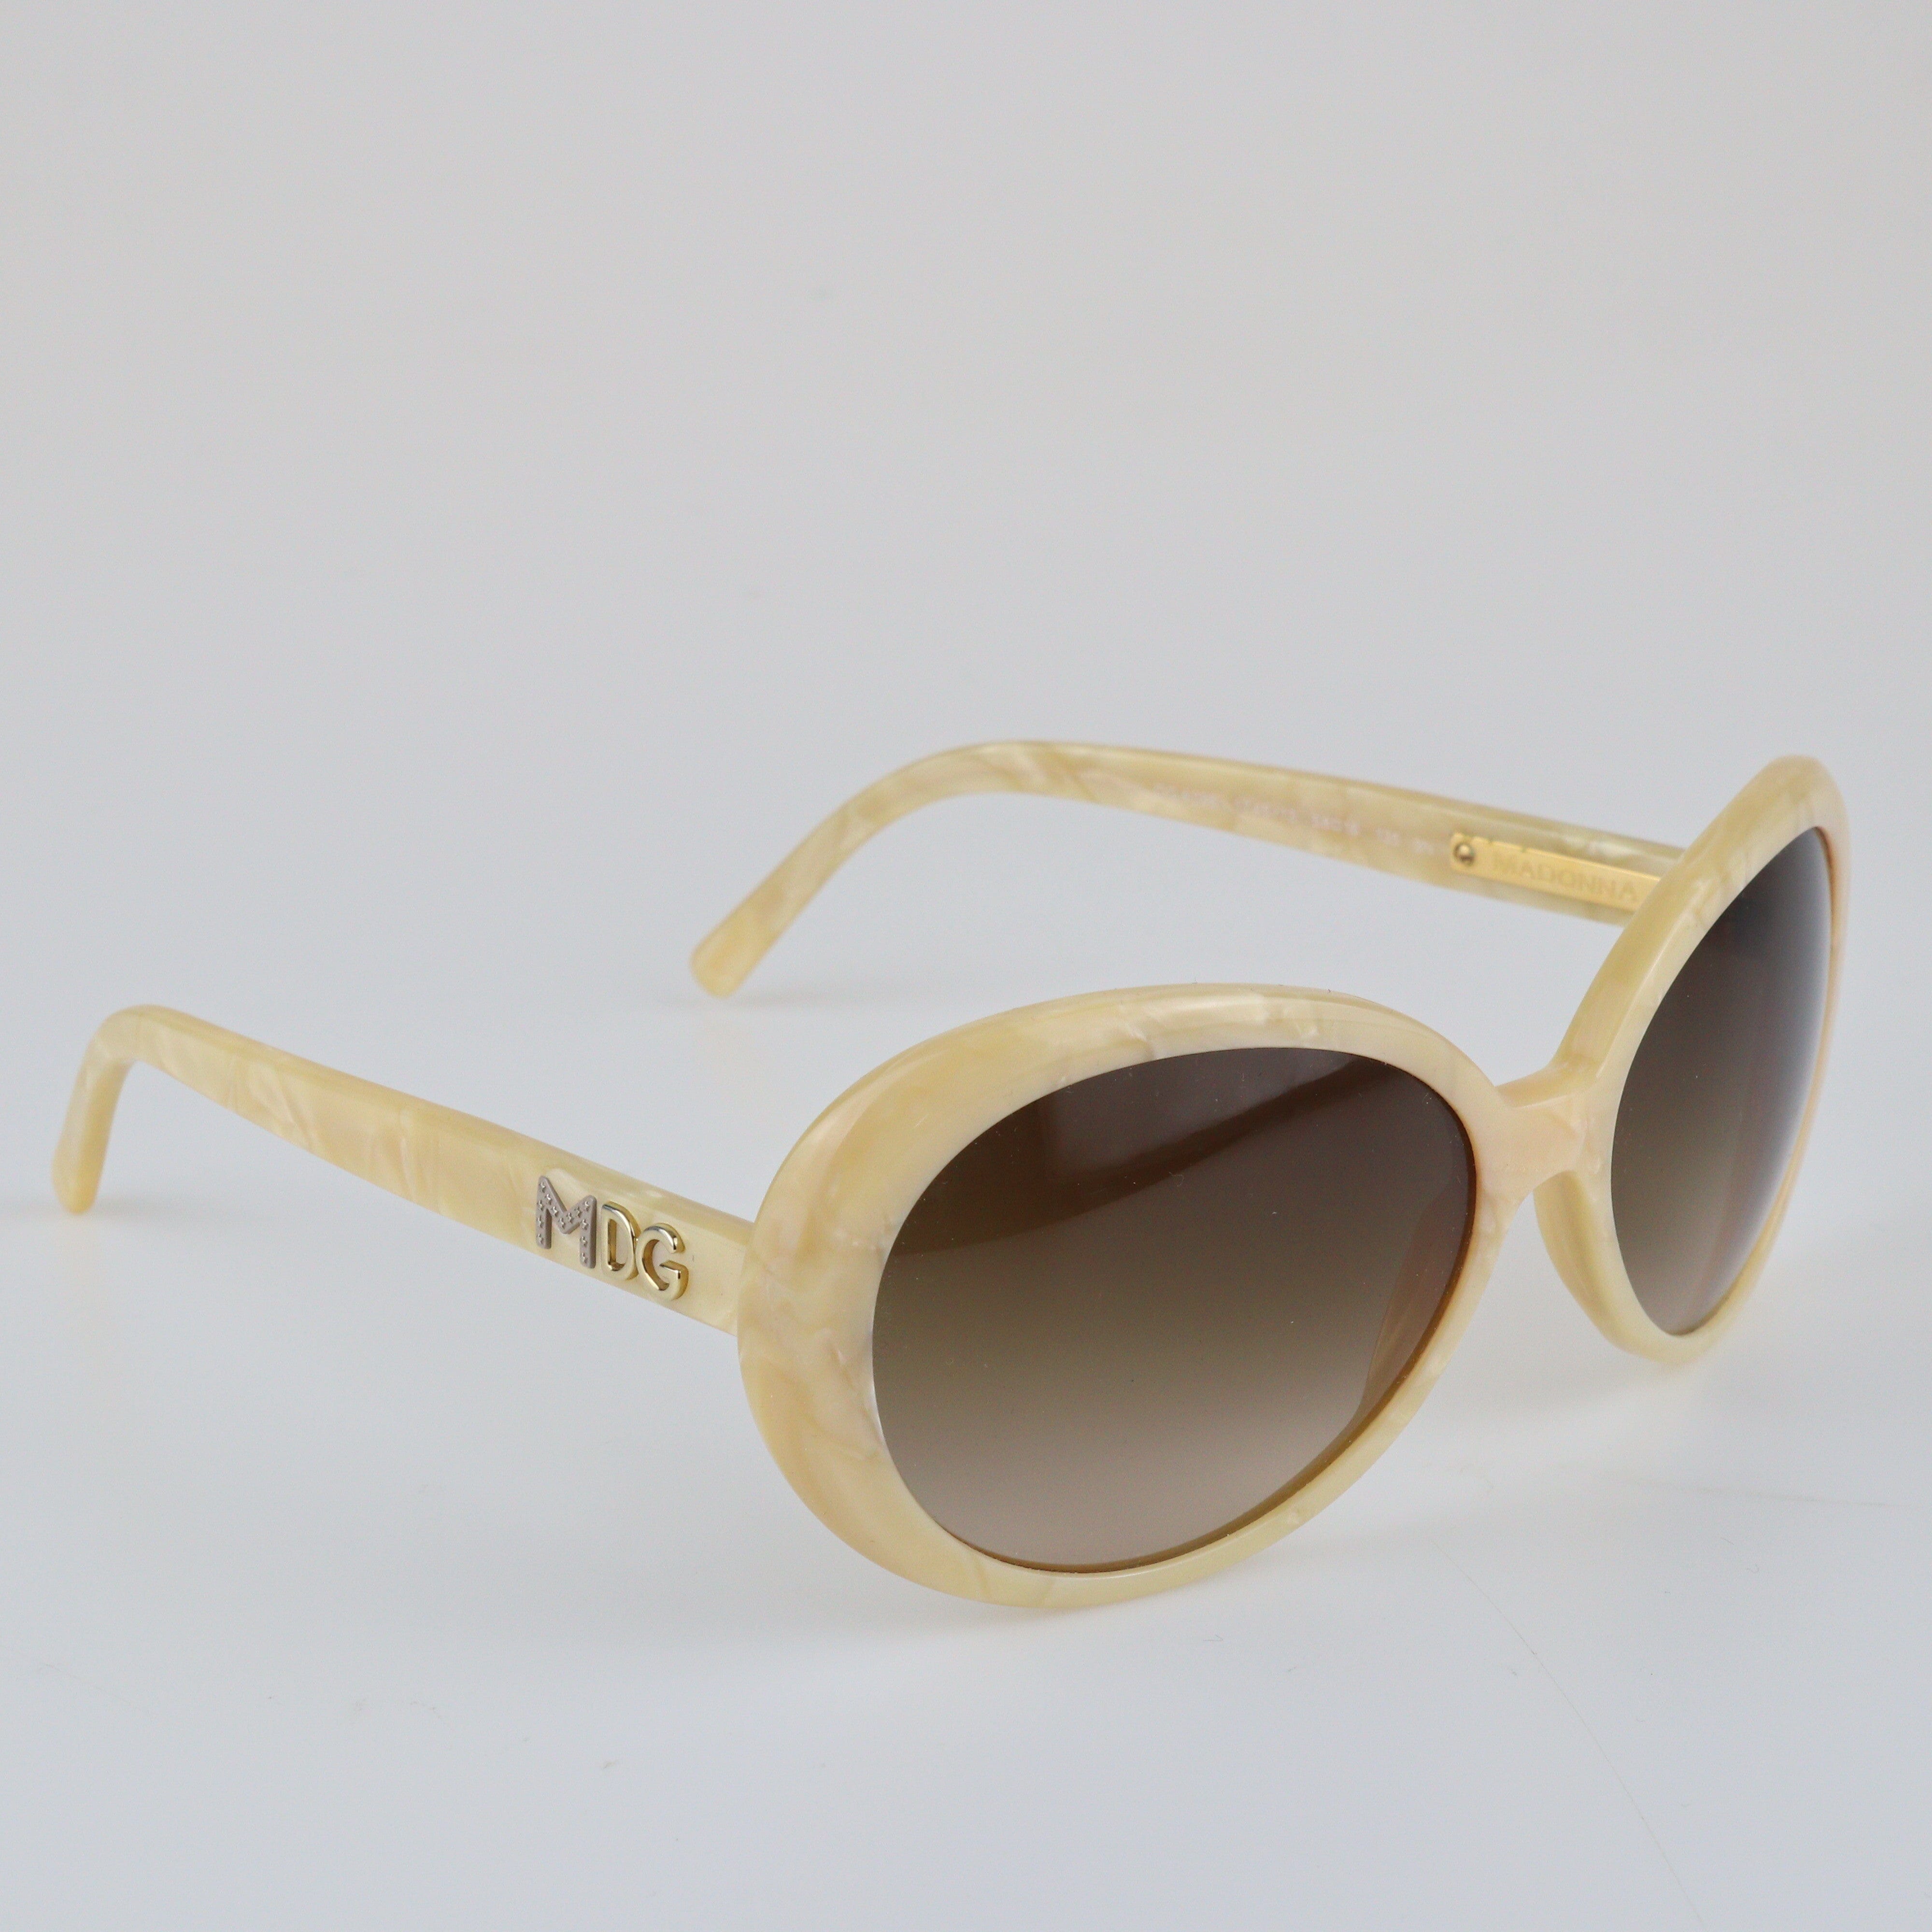 Powder Marble Madonna Sunglasses Accessories Dolce and Gabbana 